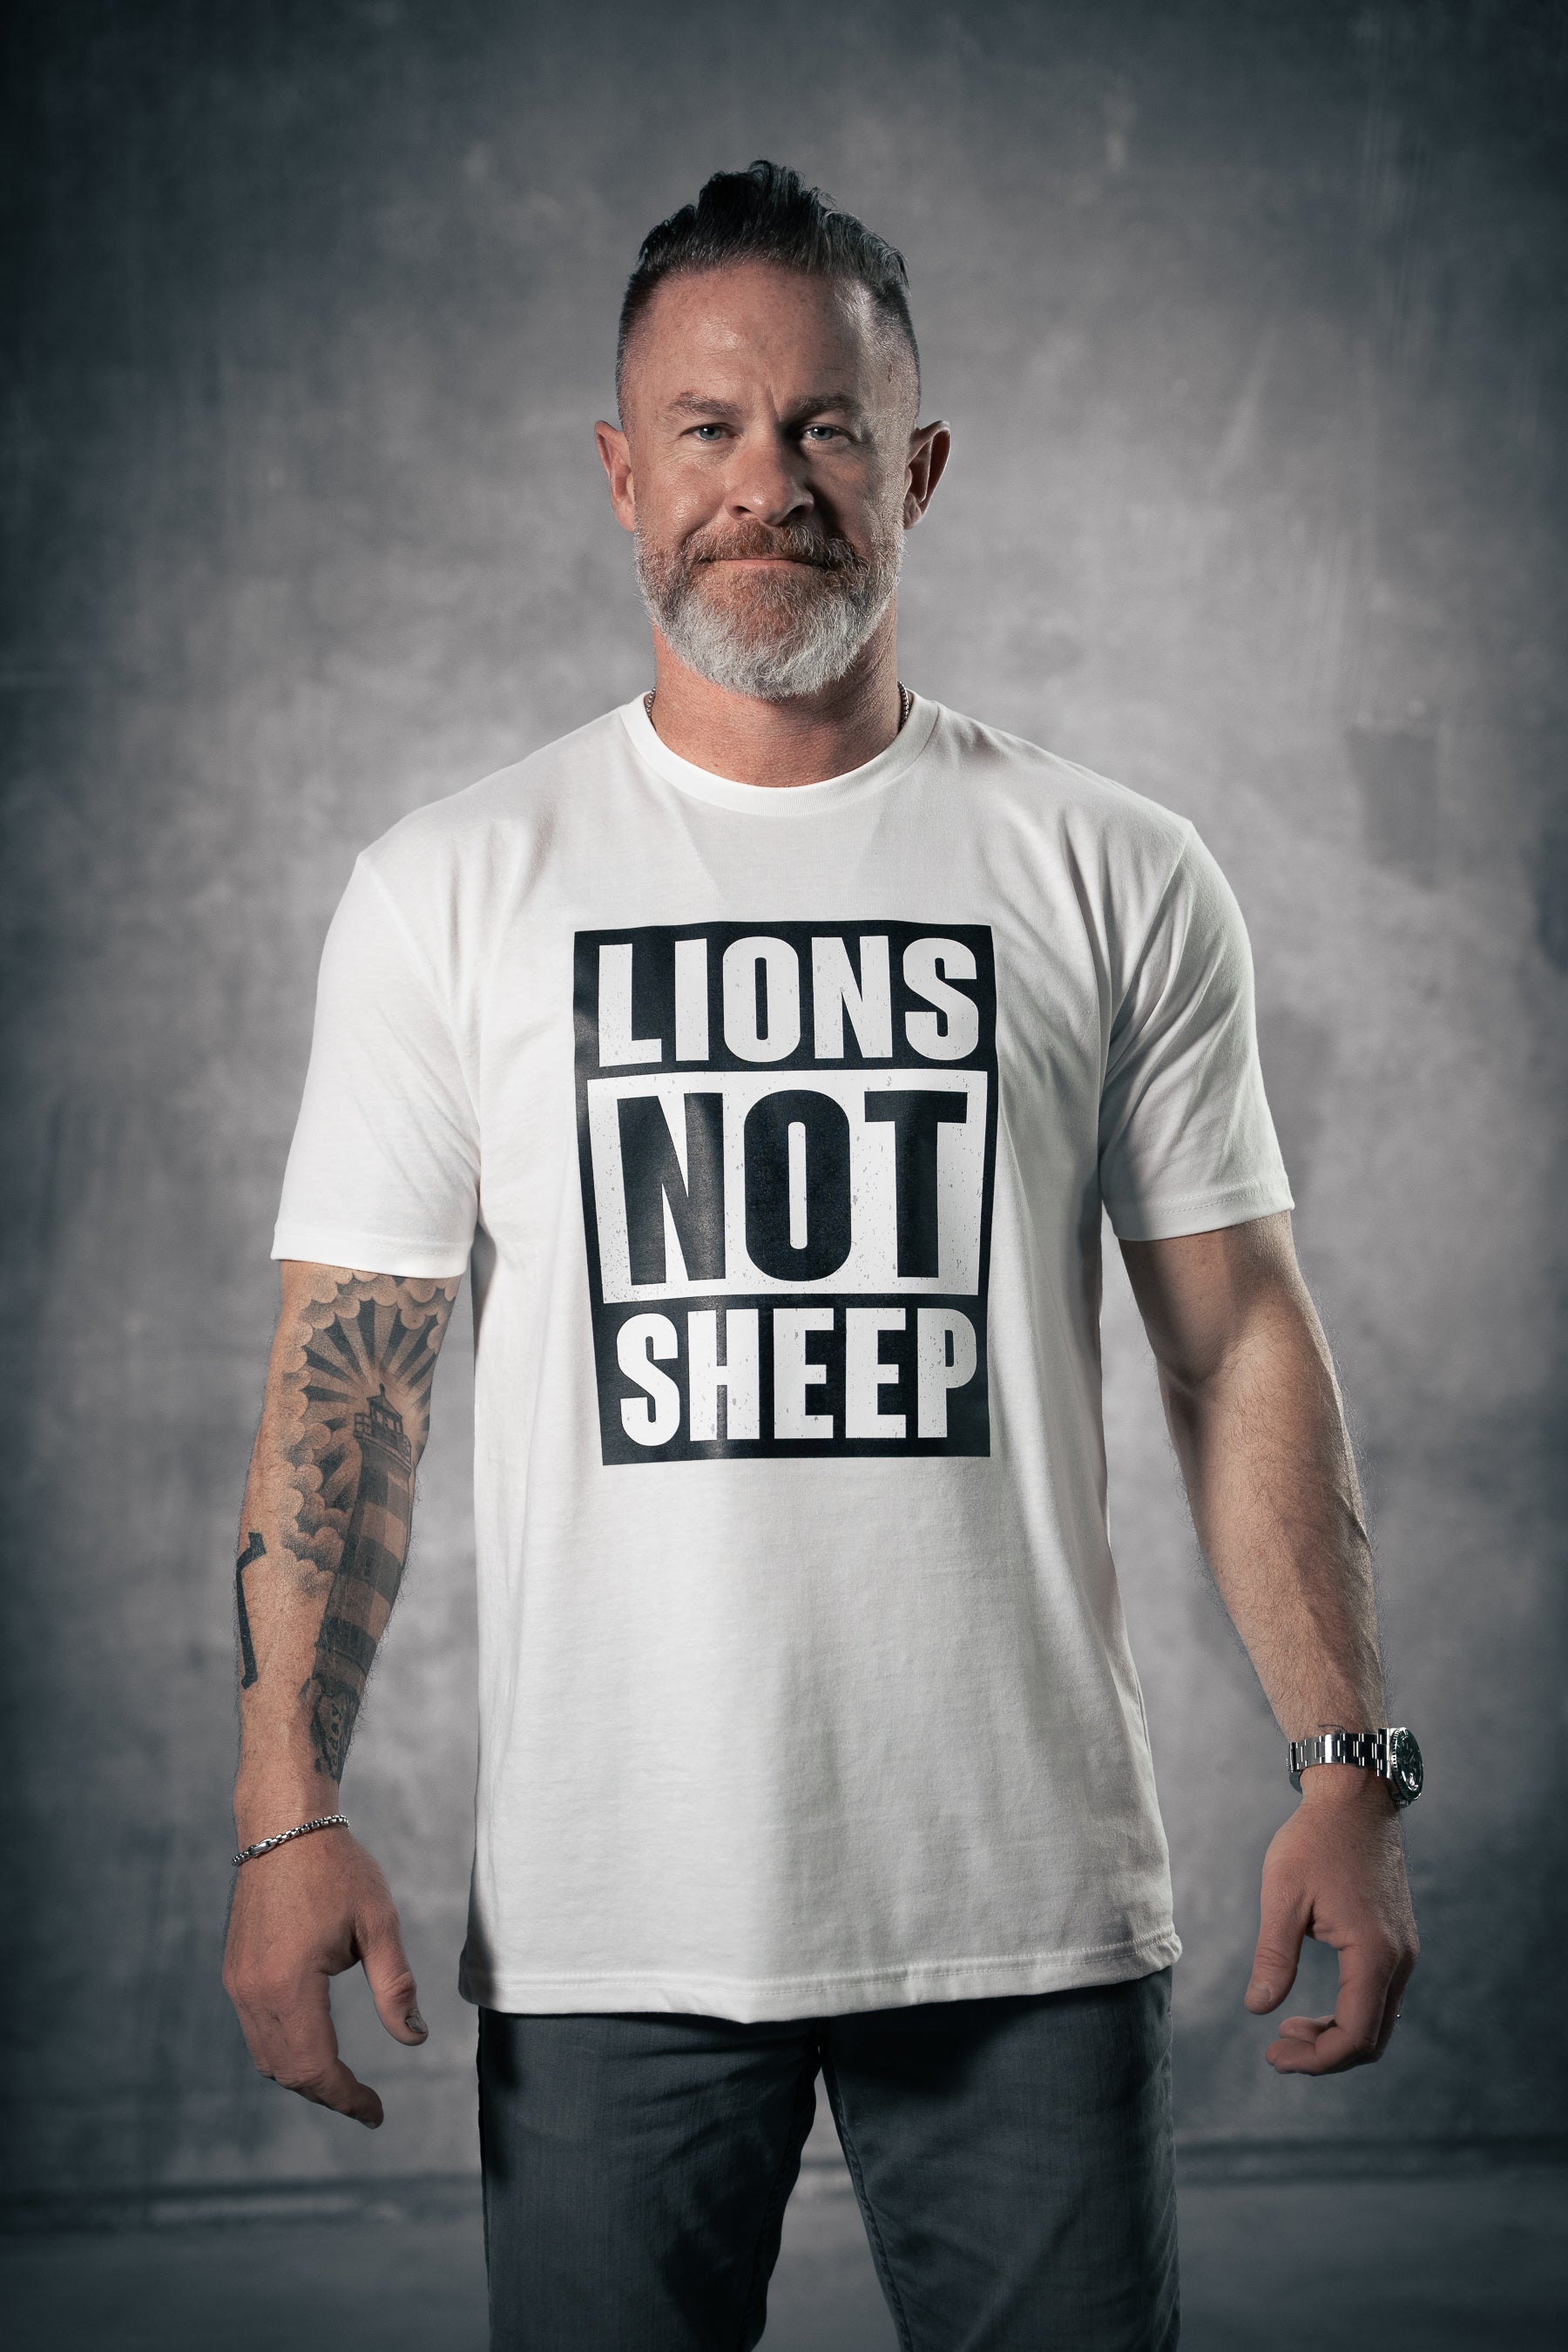 LIONS NOT SHEEP "STRAIGHT OUTTA" Tee - Lions Not Sheep ®